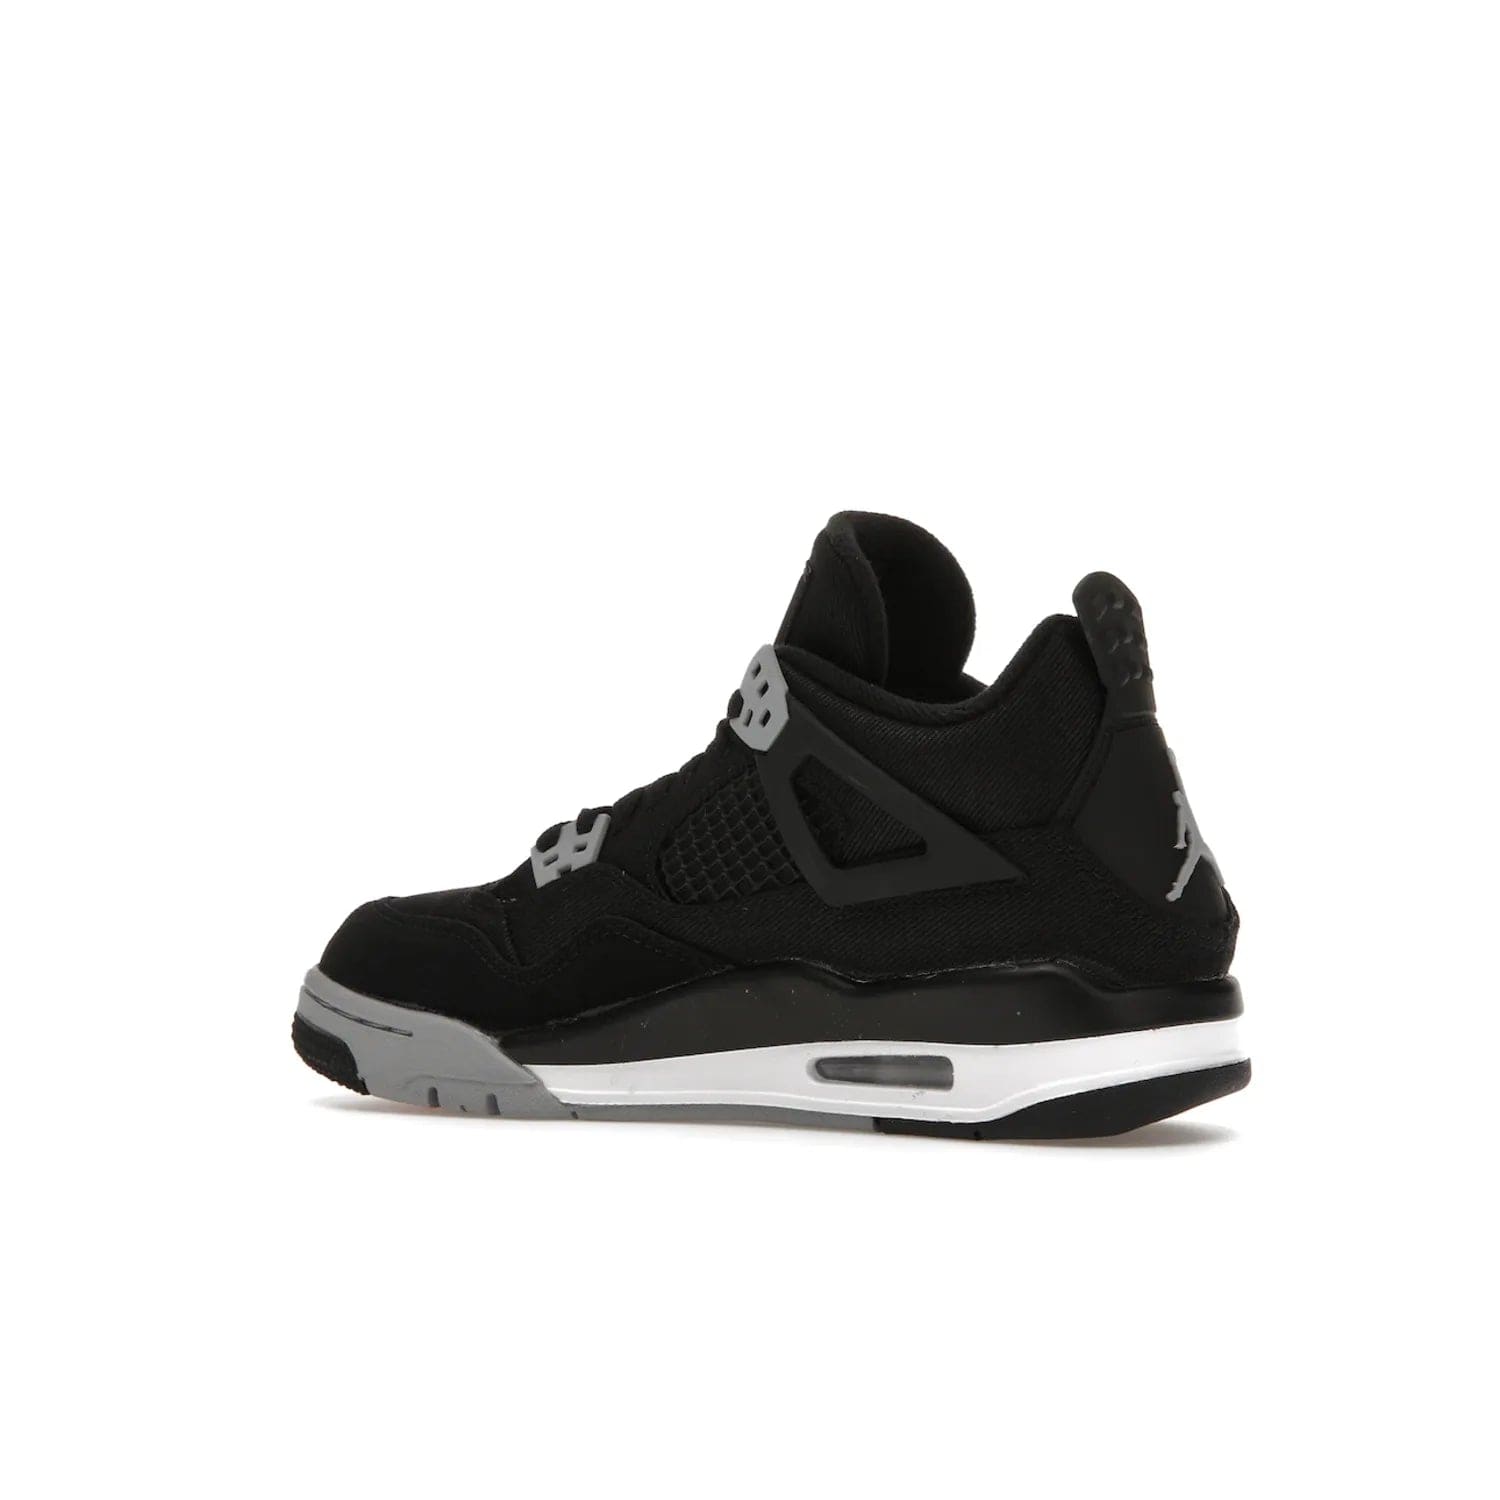 Jordan 4 Retro Black Canvas (GS) - Image 22 - Only at www.BallersClubKickz.com - Premium Air Jordan 4 Retro Black Canvas in grade-schooler's catalog. Featuring black suede canvas upper, grey molding, accents in red, white midsole, woven Jumpman tag, & visible AIR cushioning. Releasing Oct. 1, 2022.